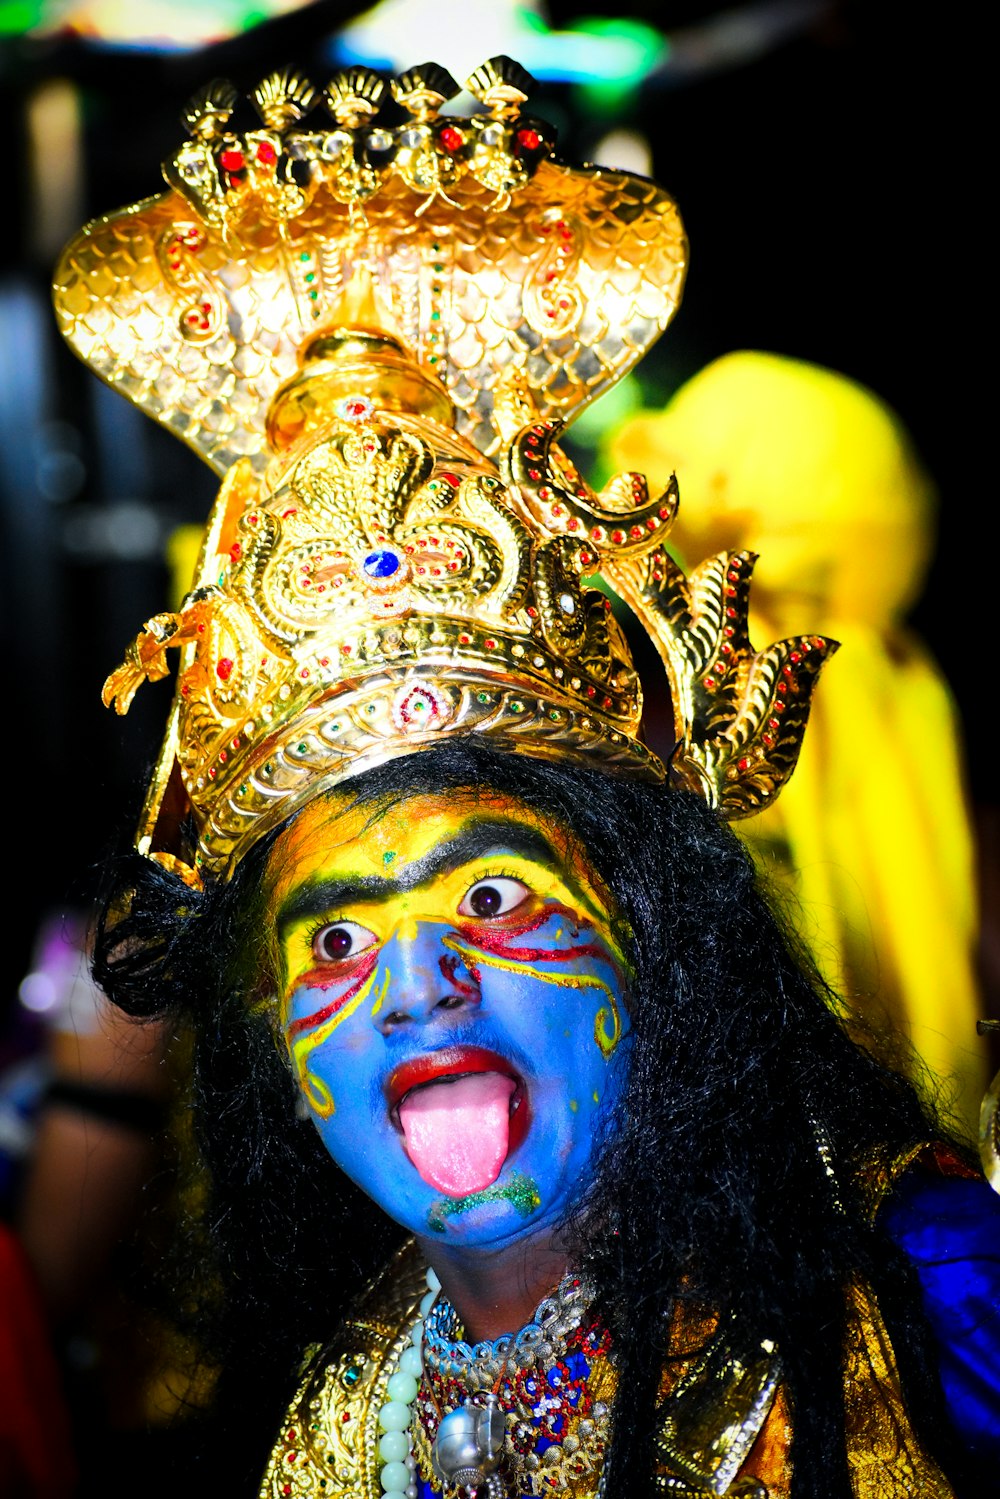 a man with a painted face and a golden crown on his head